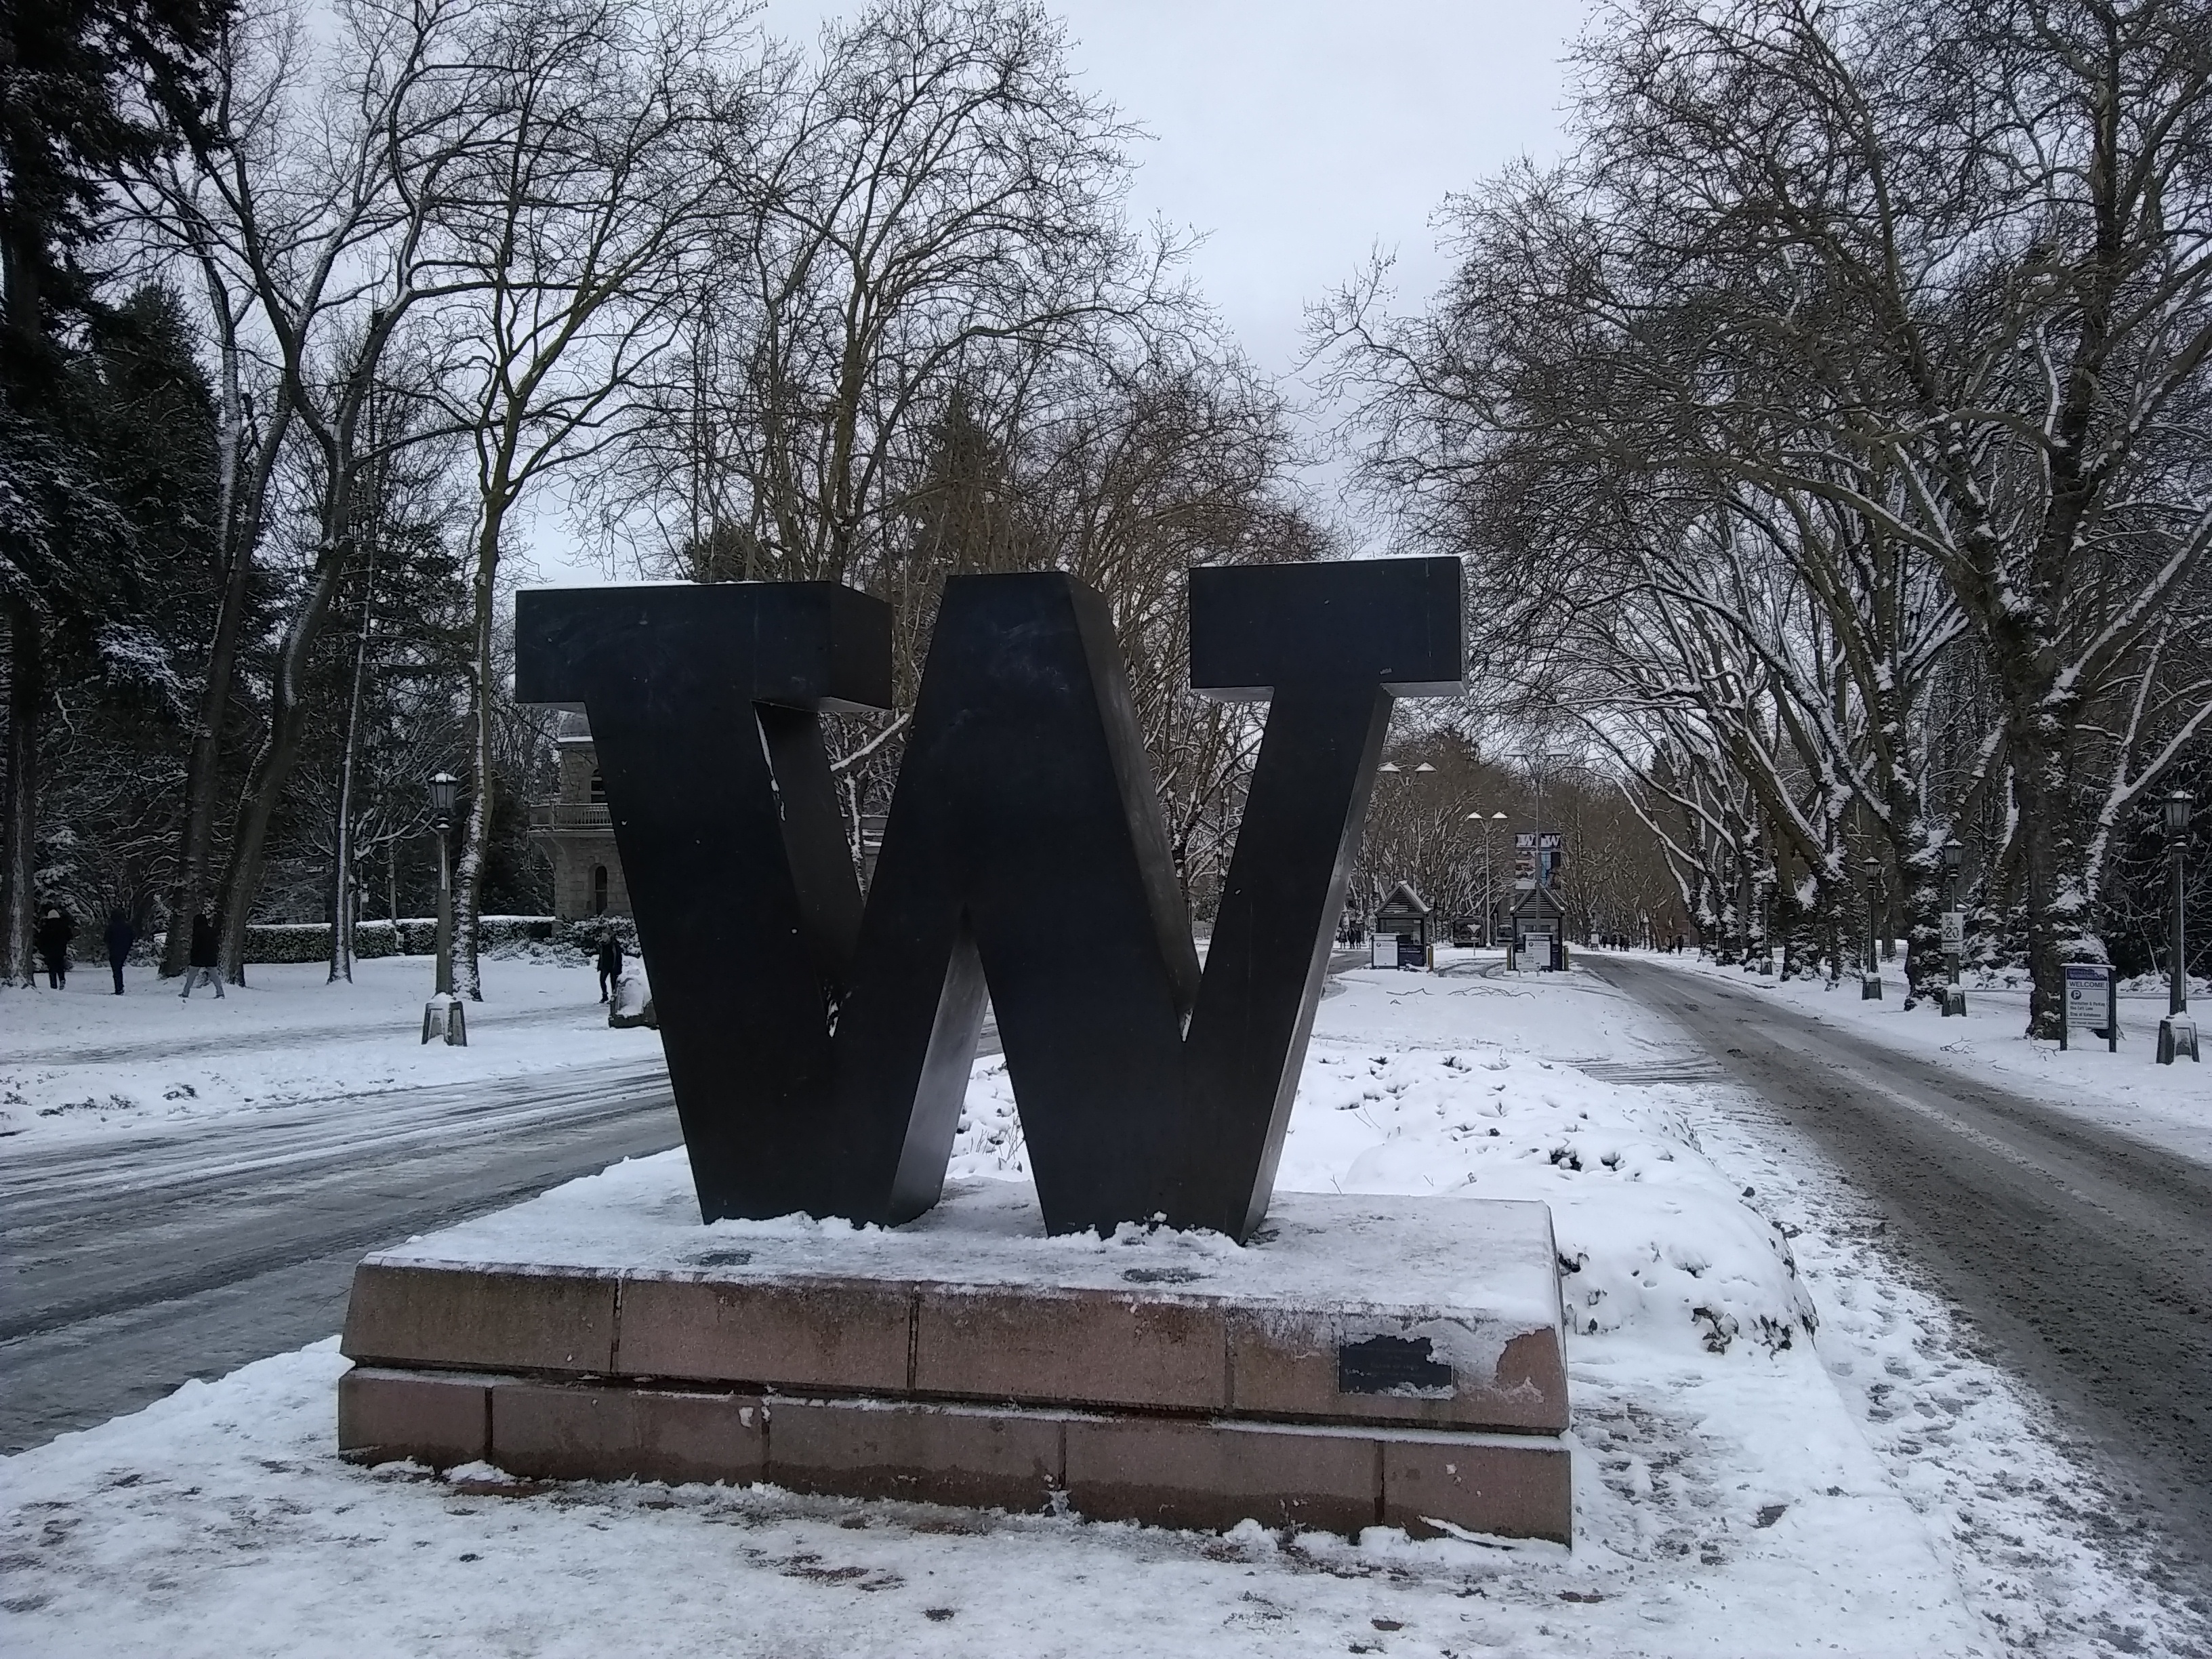 The "W" from the University of Washington.